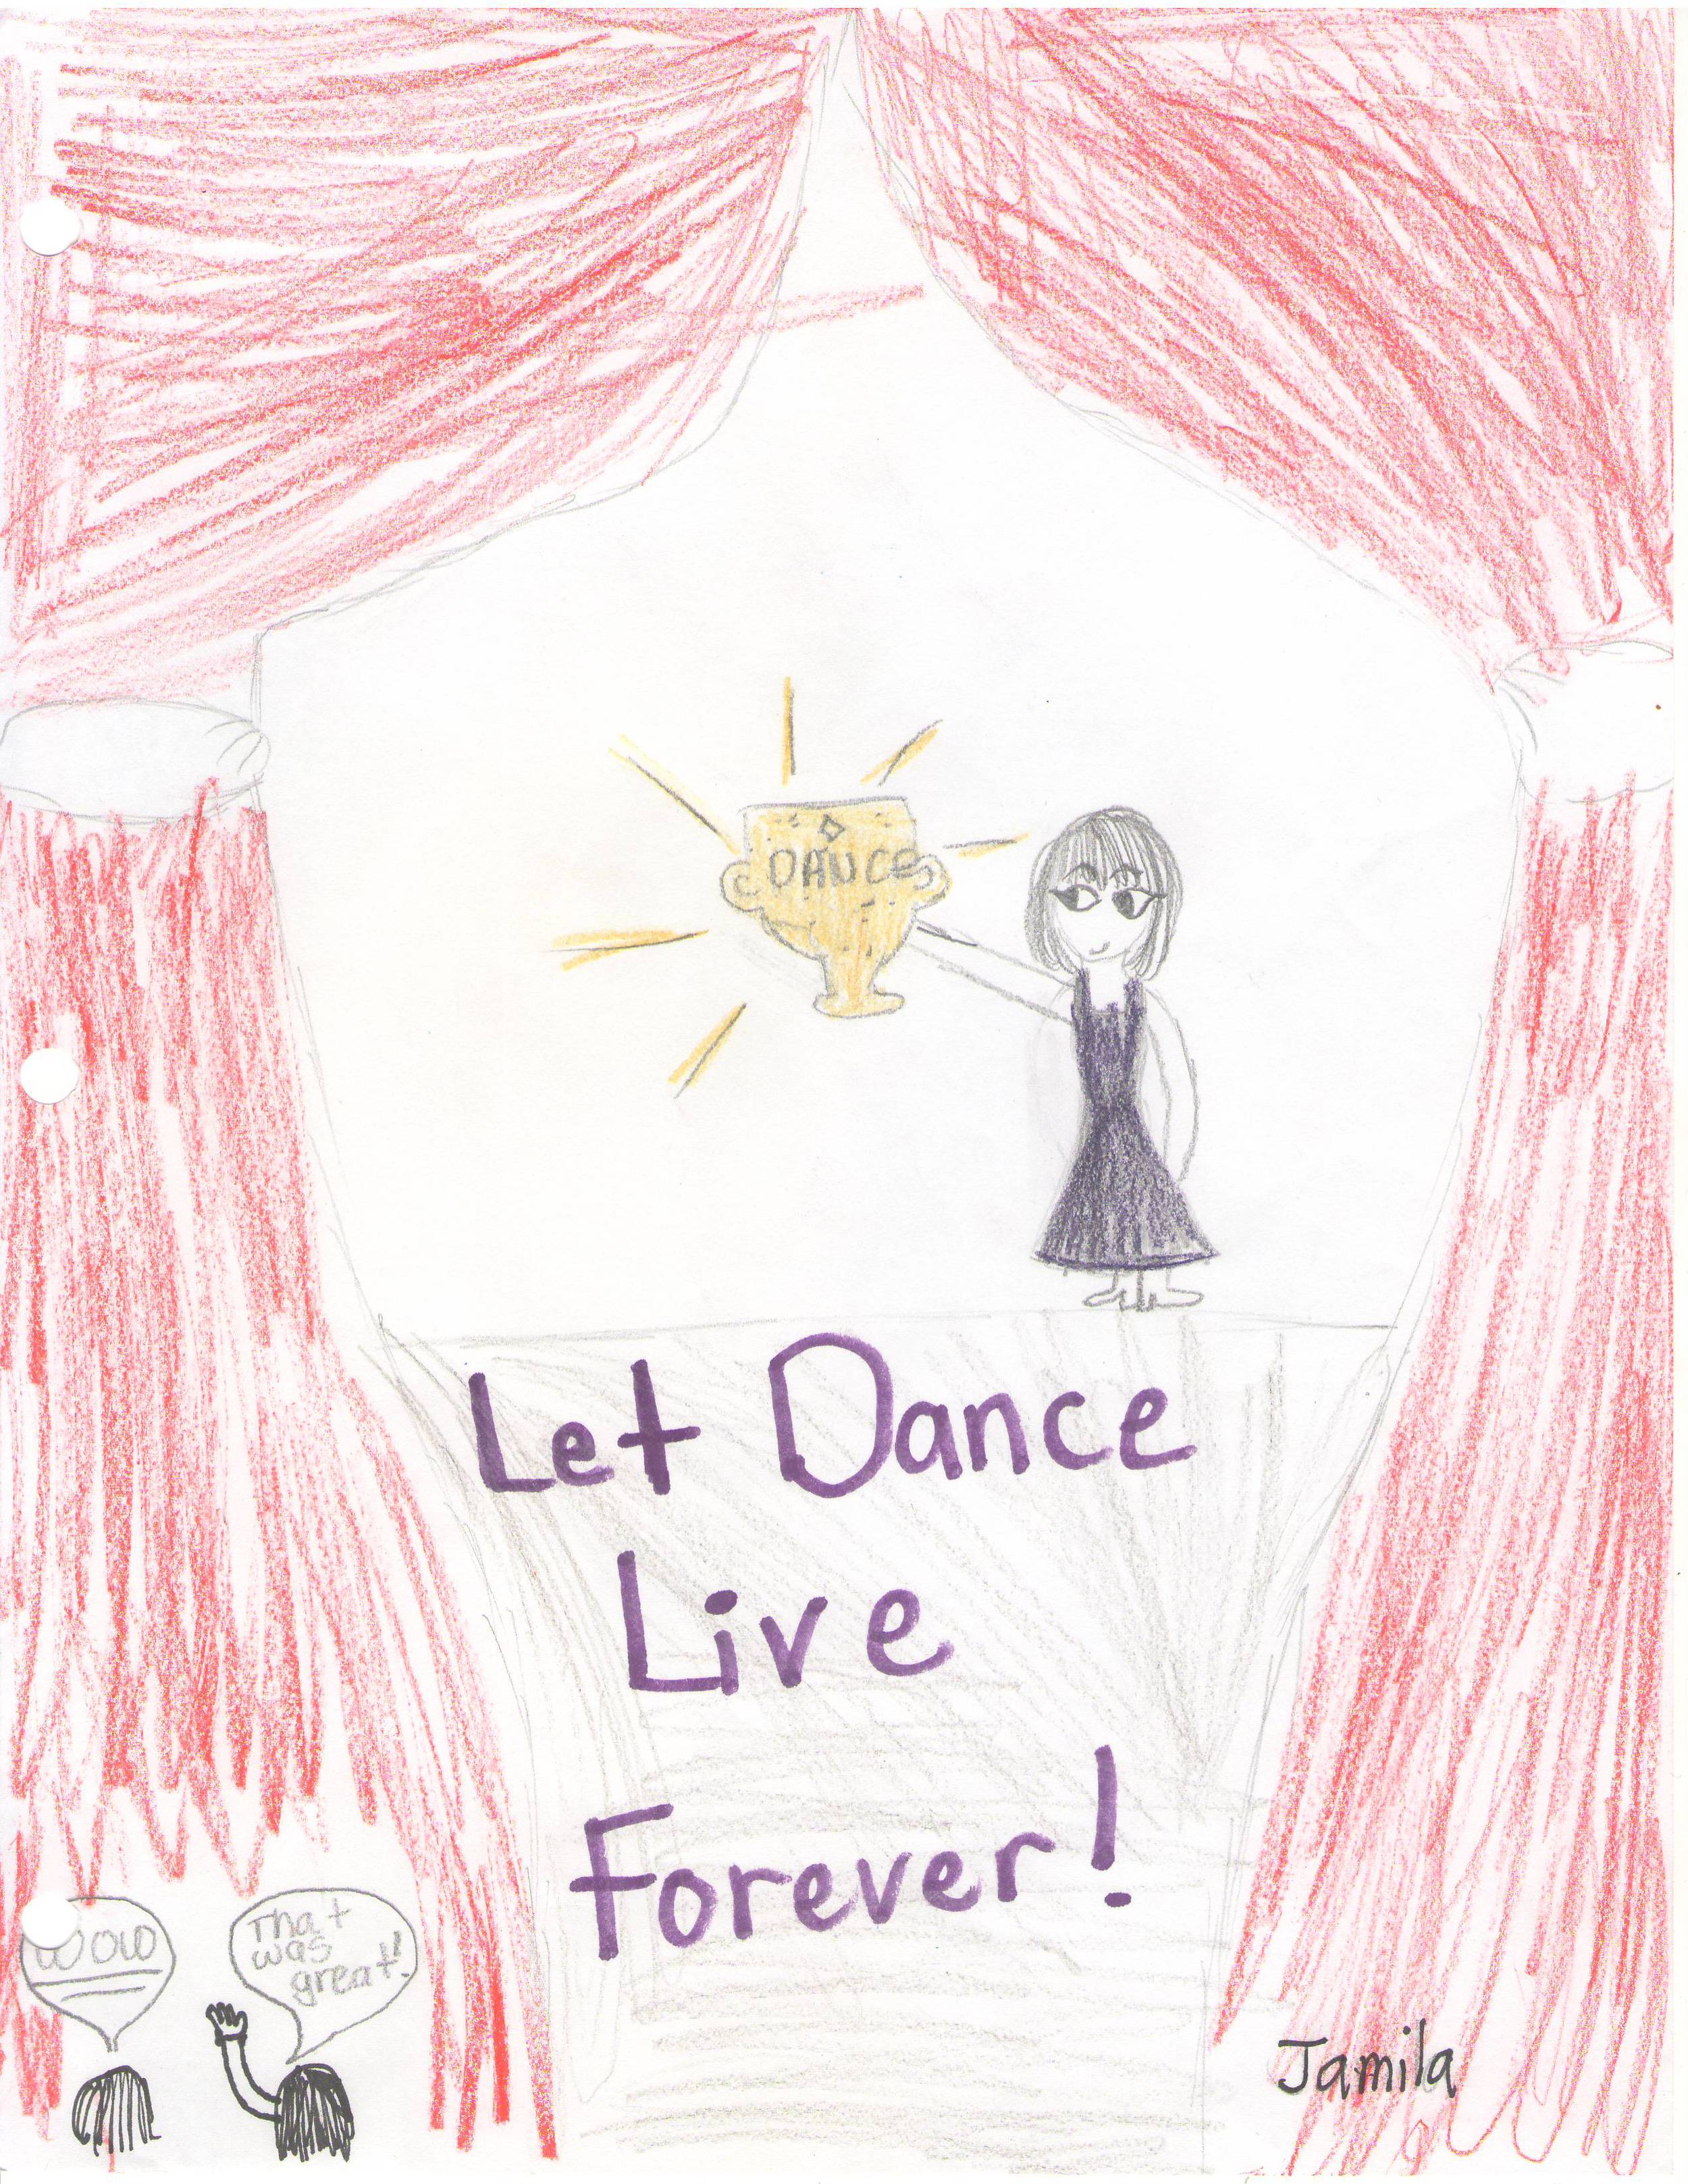 Children's Letters and Drawings0023.JPG